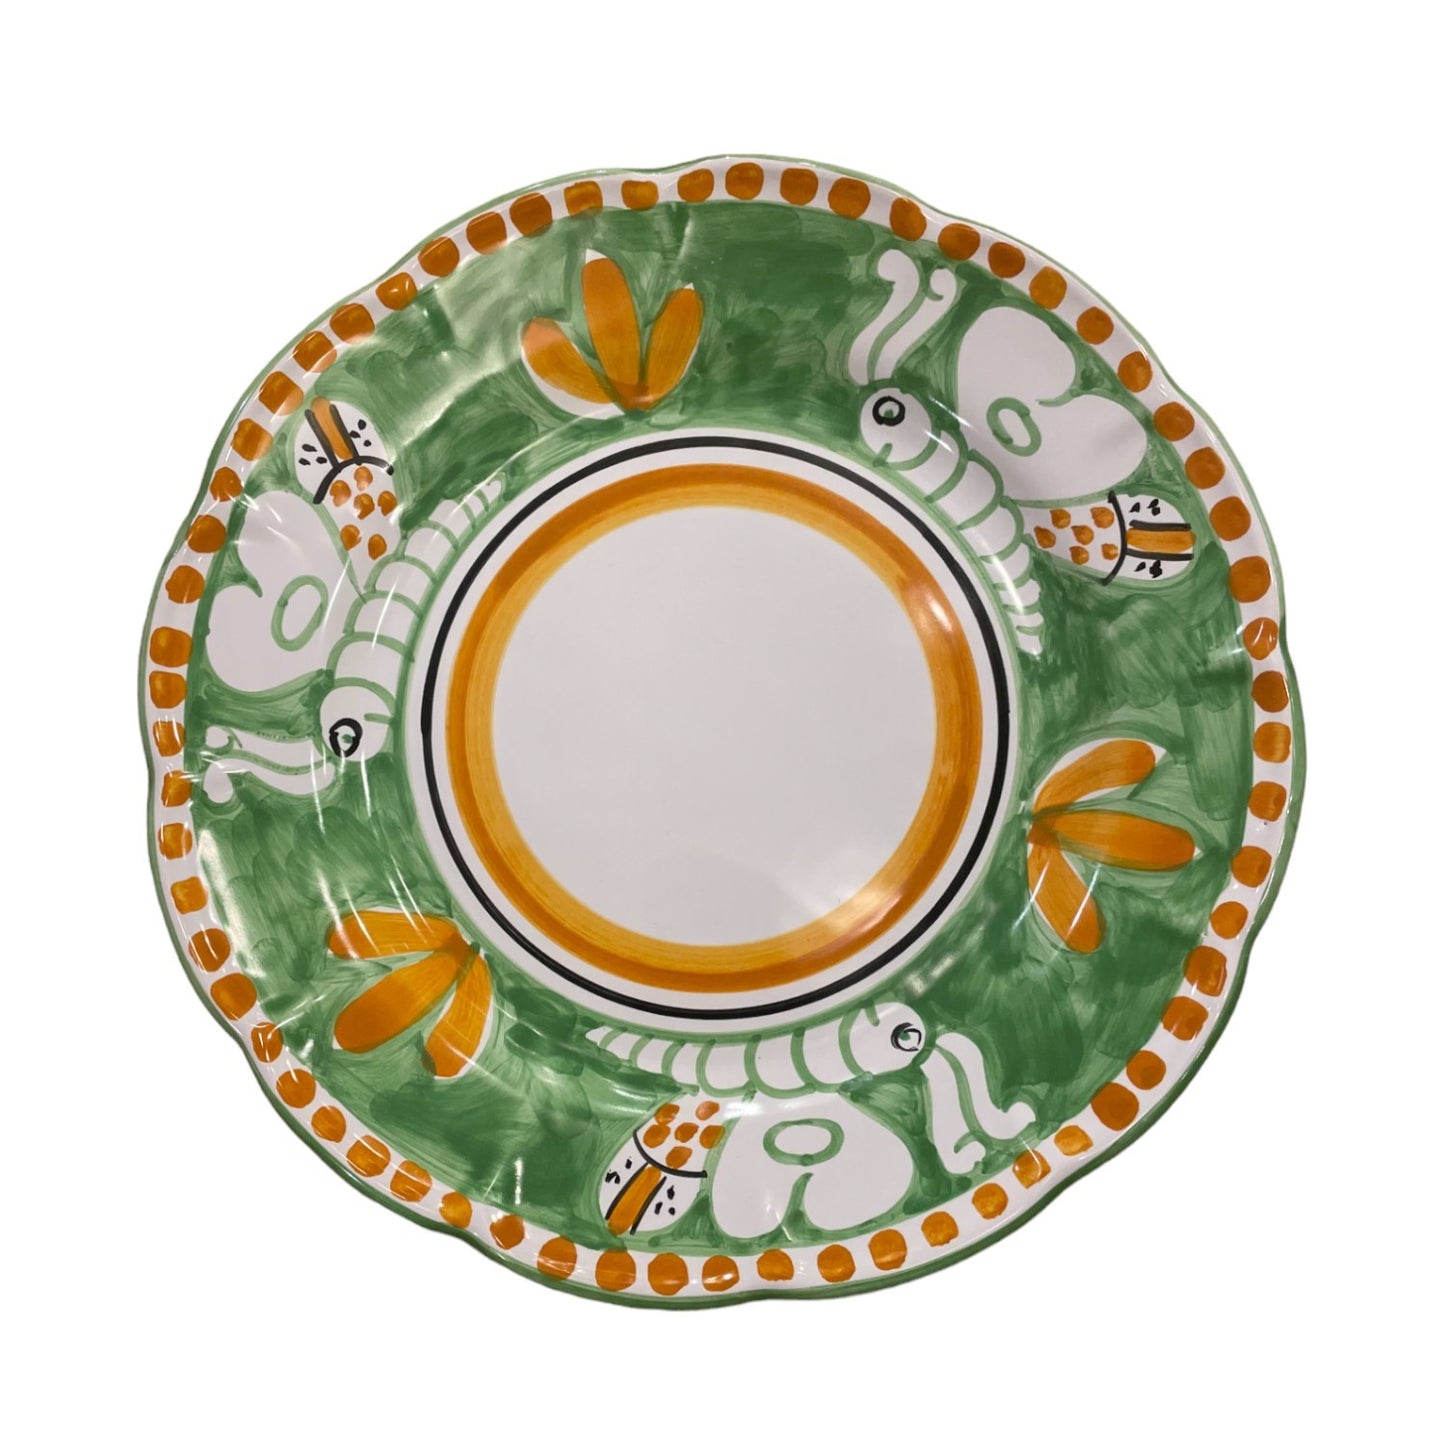 Hand Painted Zoo Plates - Green